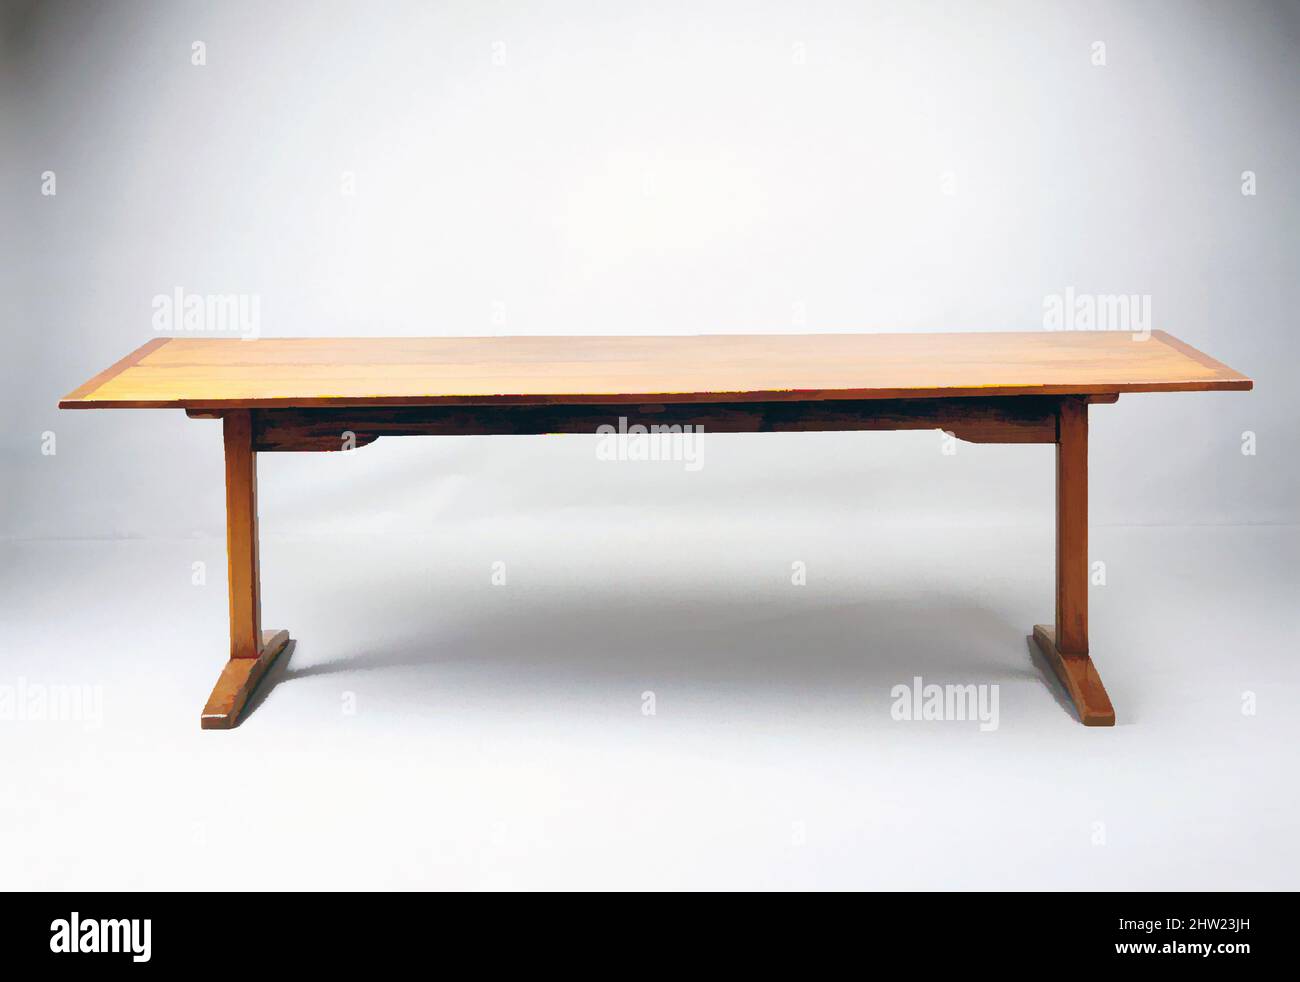 Art inspired by Dining Table, 1800–1825, Made in Hancock, Massachusetts, United States, American, Shaker, Pine, maple, basswood, 28 1/2 x 31 1/4 x 96 1/2 in. (72.4 x 79.4 x 245.1 cm), Furniture, Classic works modernized by Artotop with a splash of modernity. Shapes, color and value, eye-catching visual impact on art. Emotions through freedom of artworks in a contemporary way. A timeless message pursuing a wildly creative new direction. Artists turning to the digital medium and creating the Artotop NFT Stock Photo